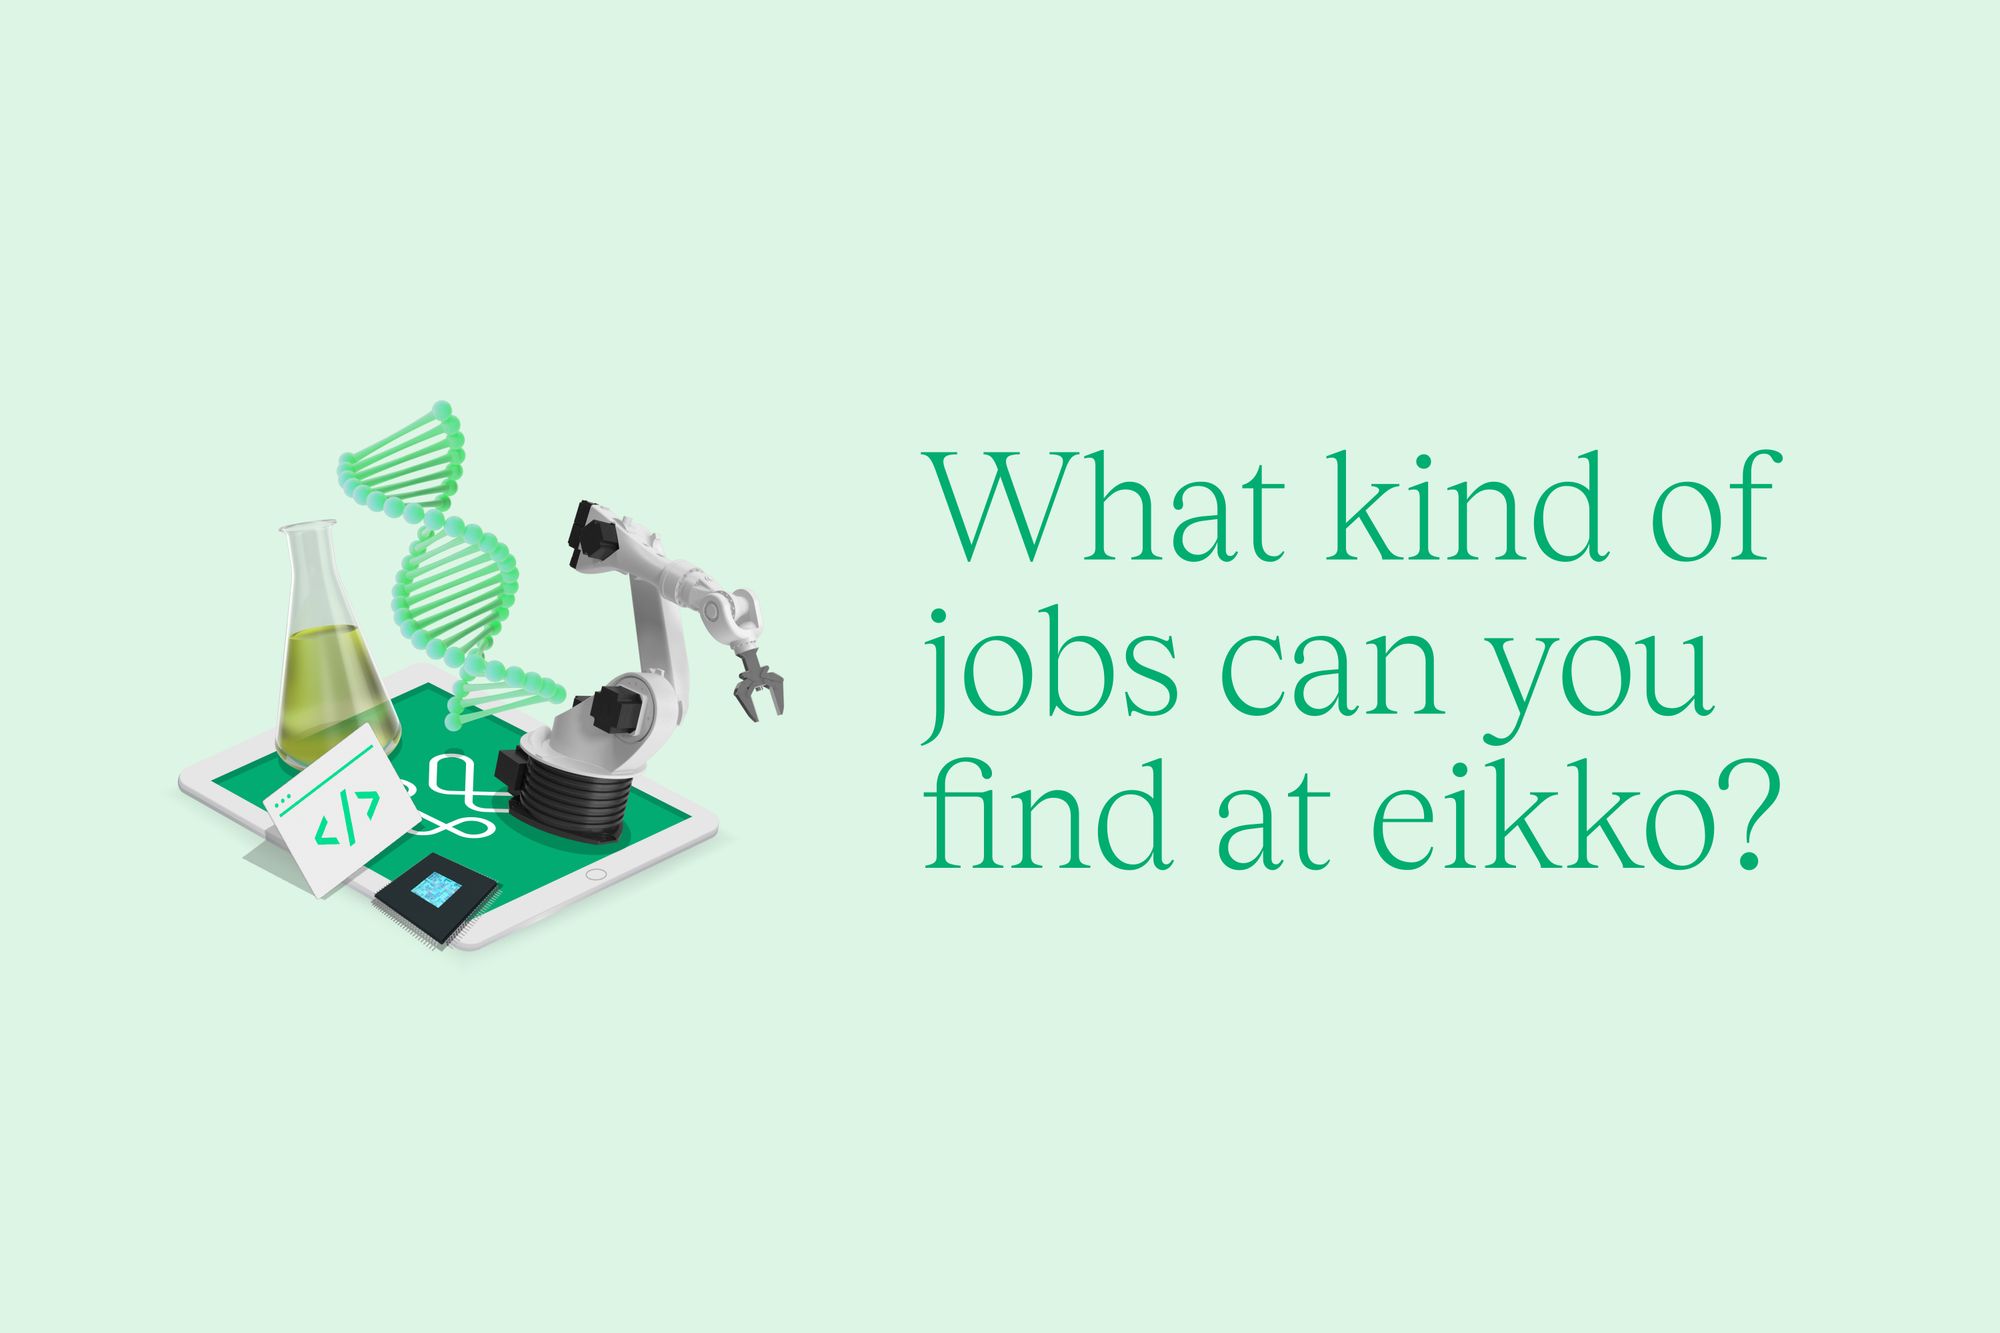 What kind of jobs can you find at eikko? 🚀